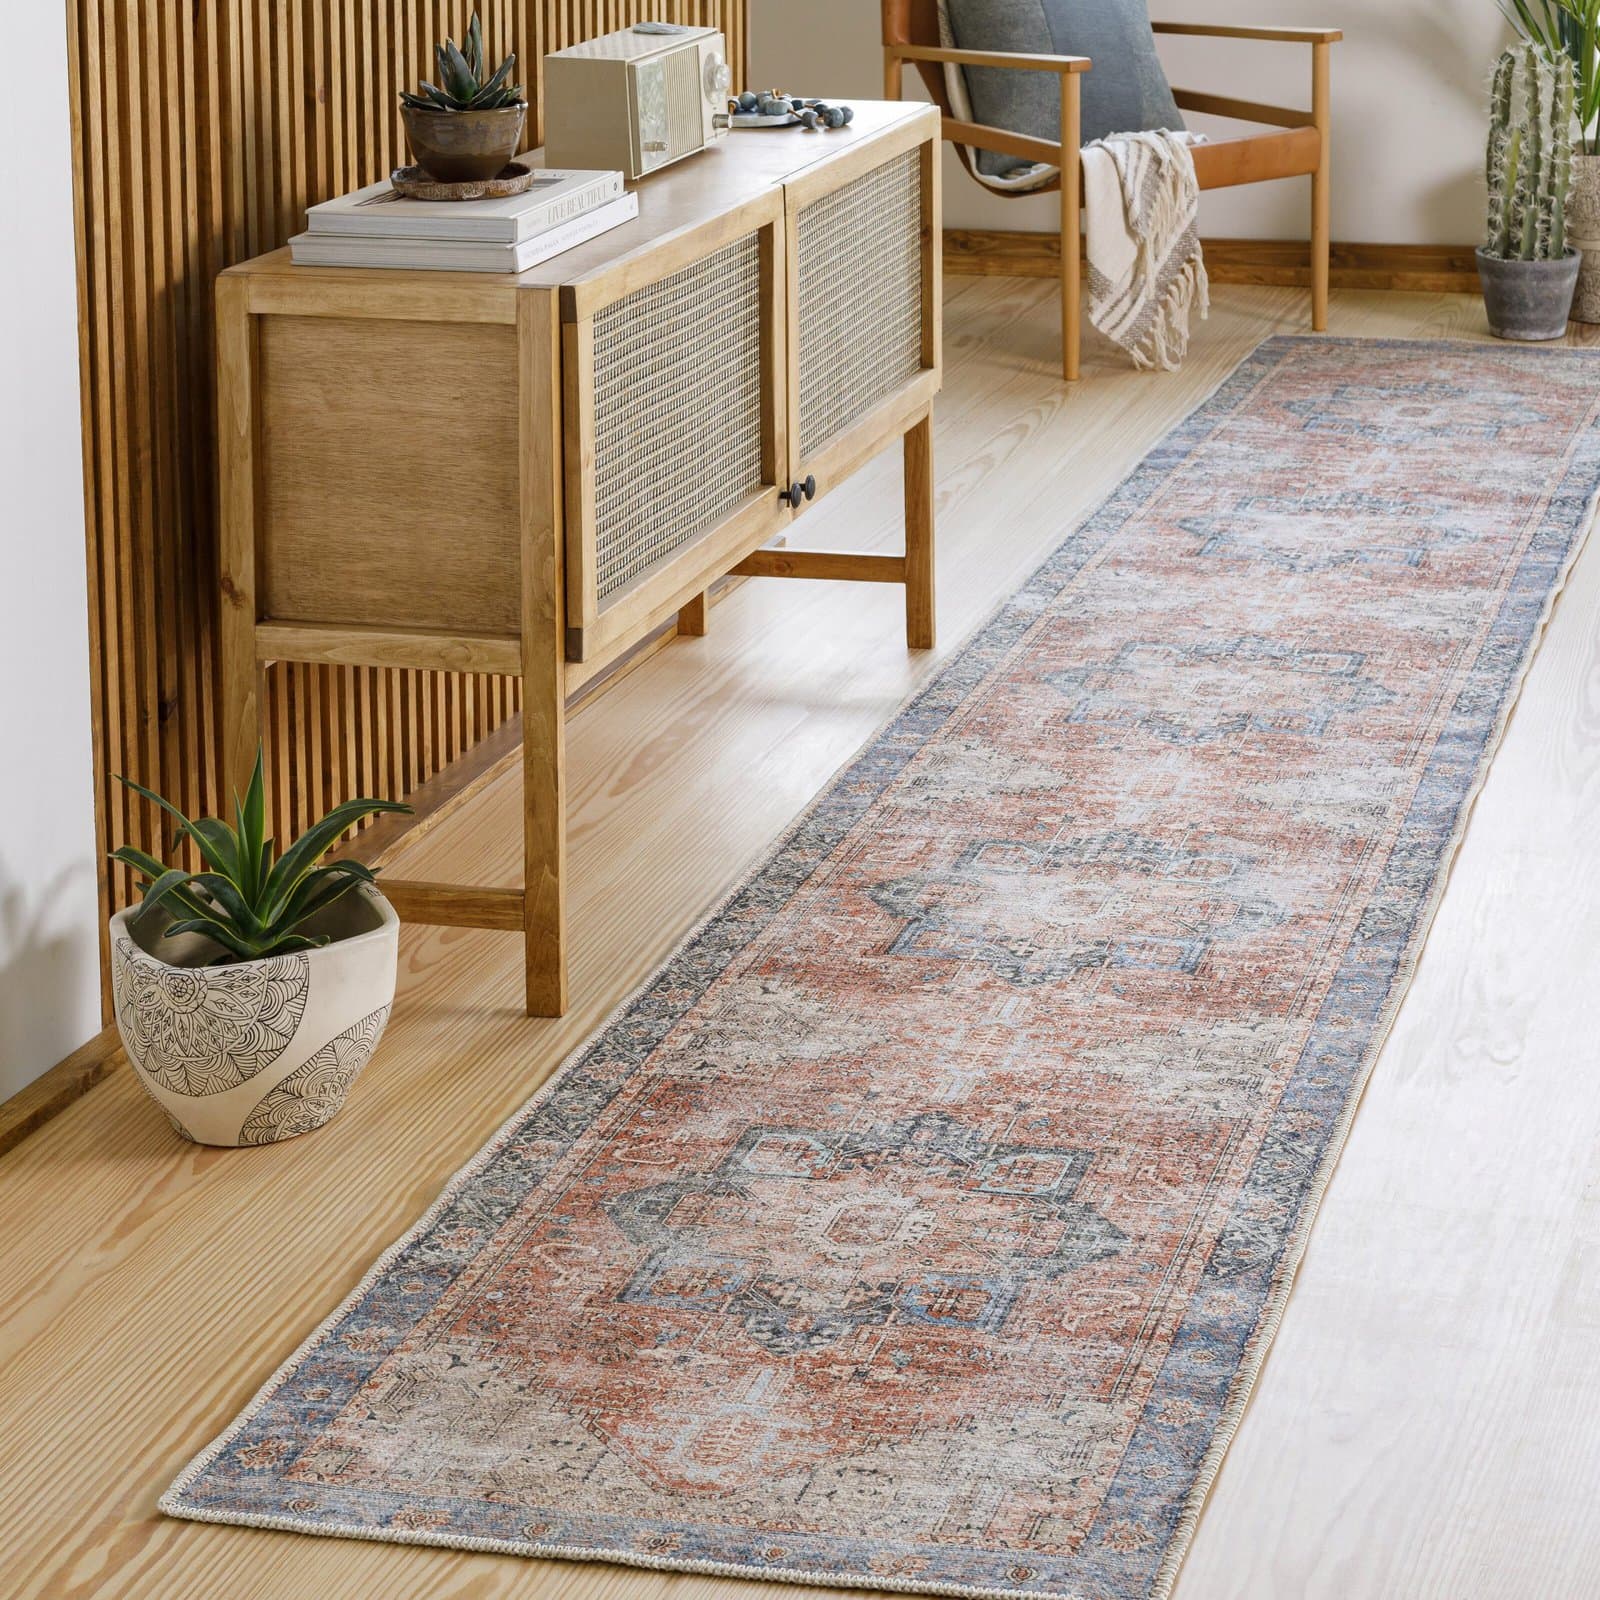 Add a Vintage Feel with an Oriental Runner